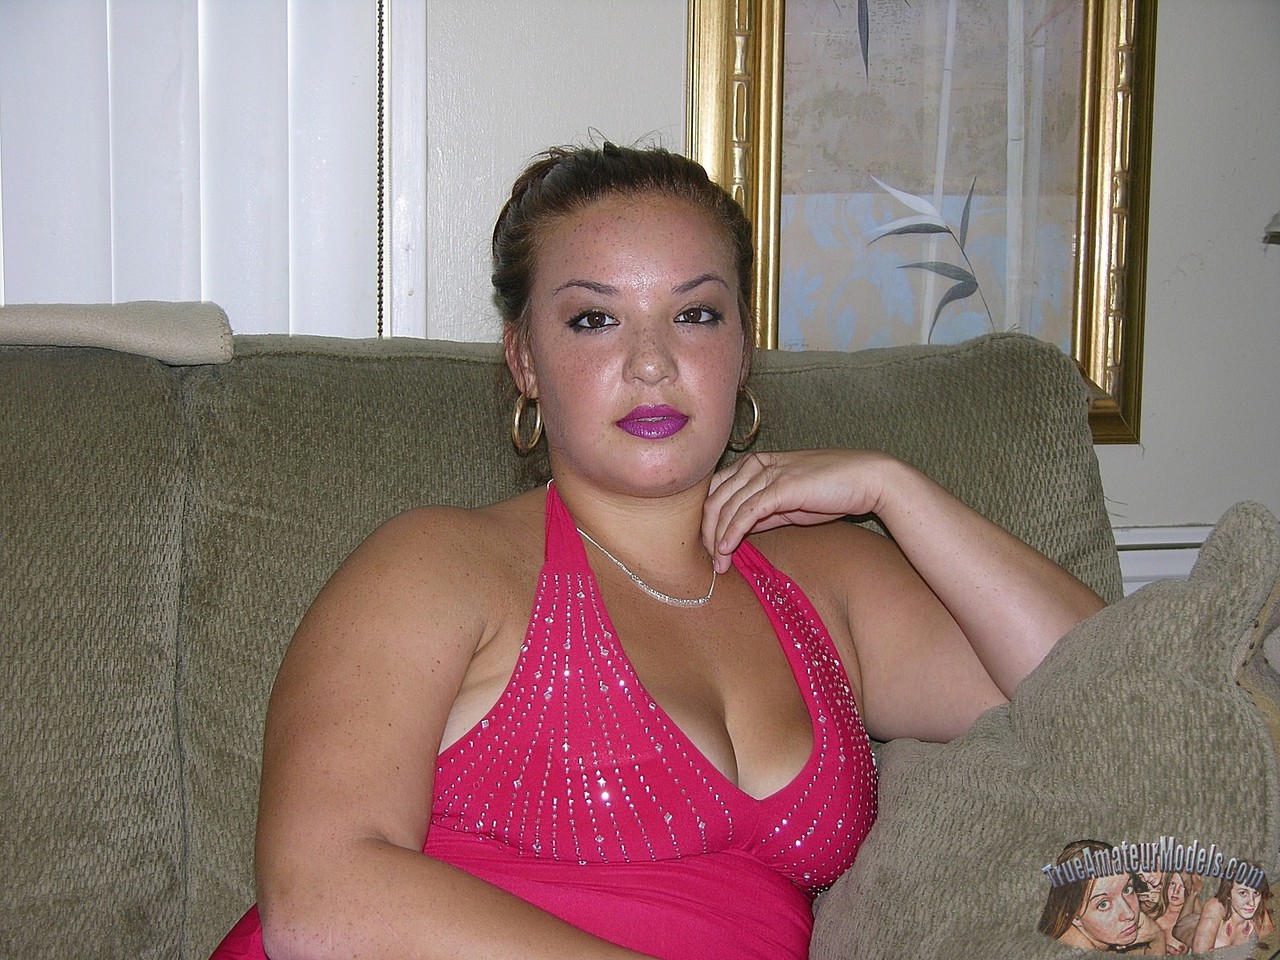 While modeling at home in a completely nude dress, amateur BBW Brittany K takes off her red dress.